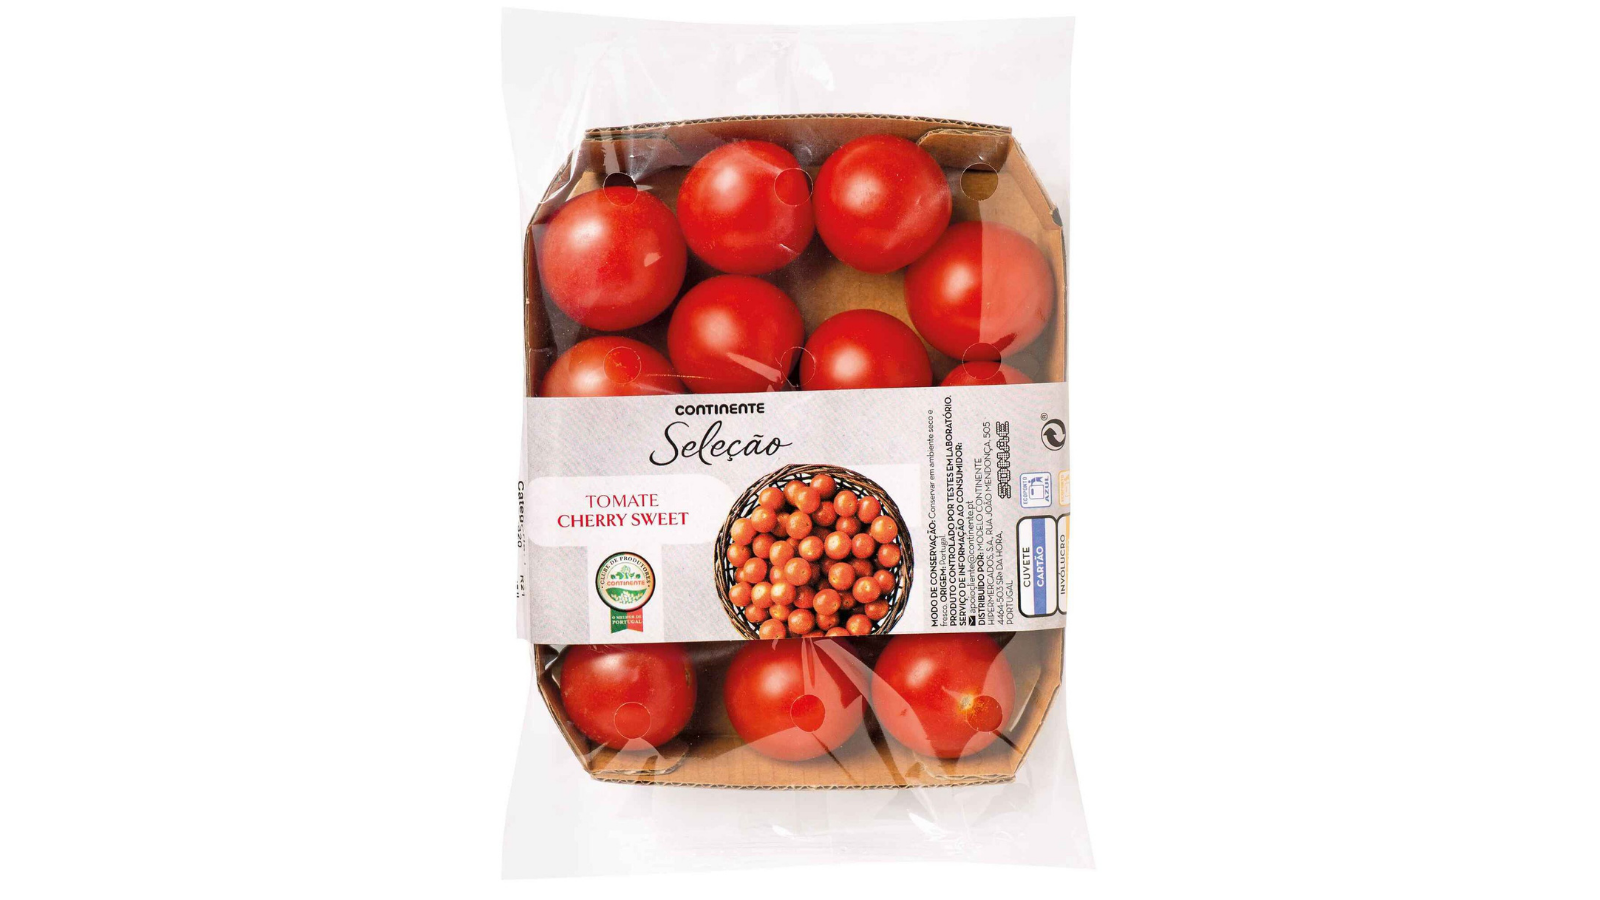 Tomate Cherry Sweet Continente